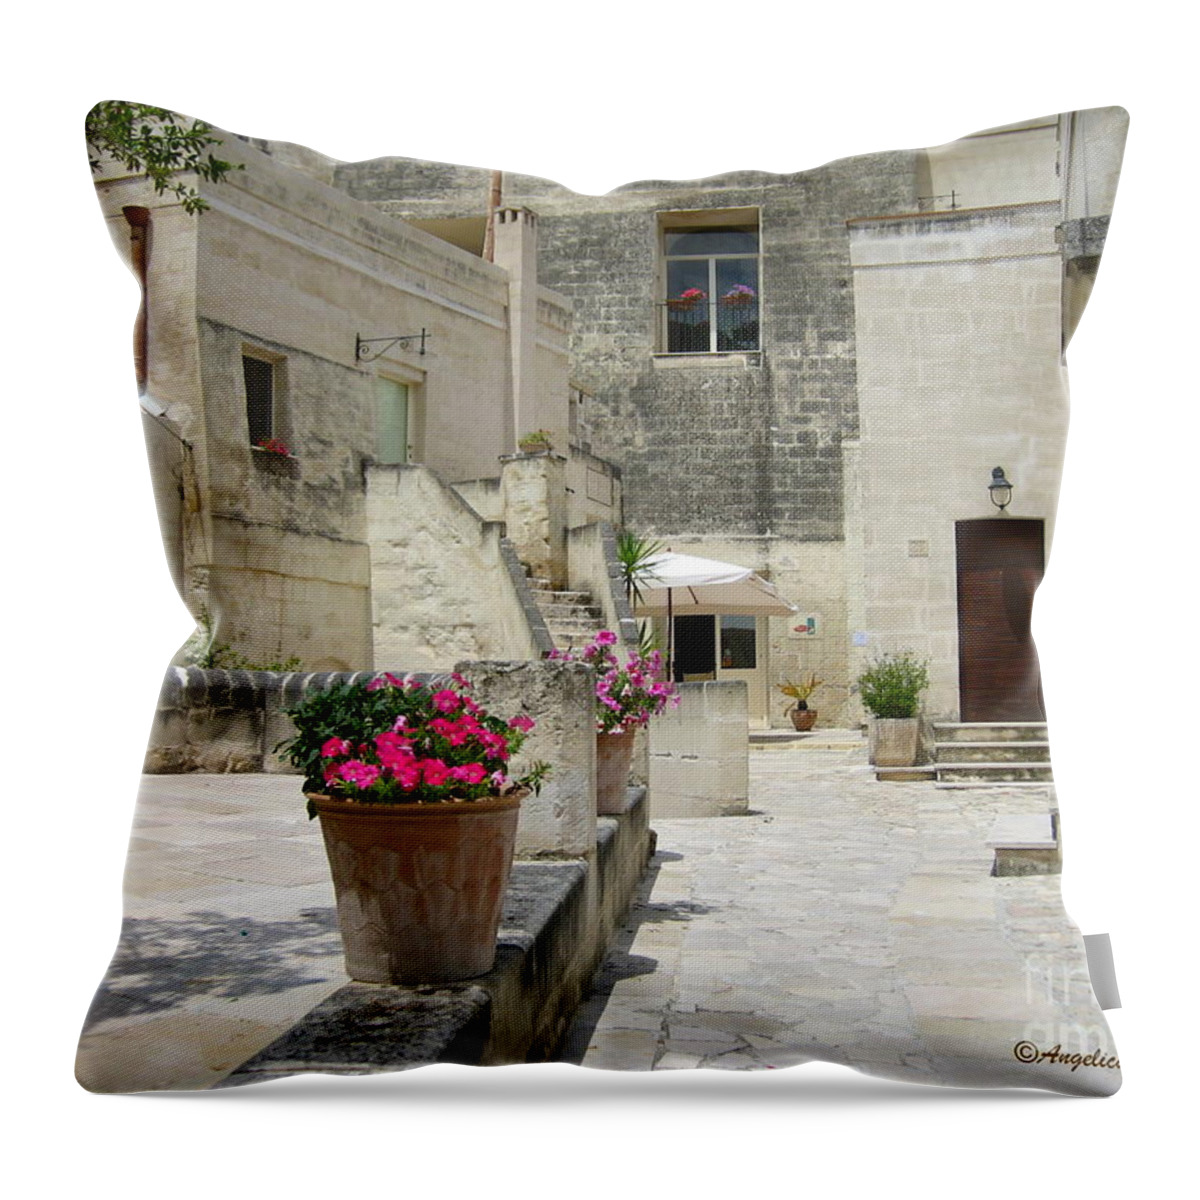 Cityscape Throw Pillow featuring the photograph Matera with Flowers by Italian Art